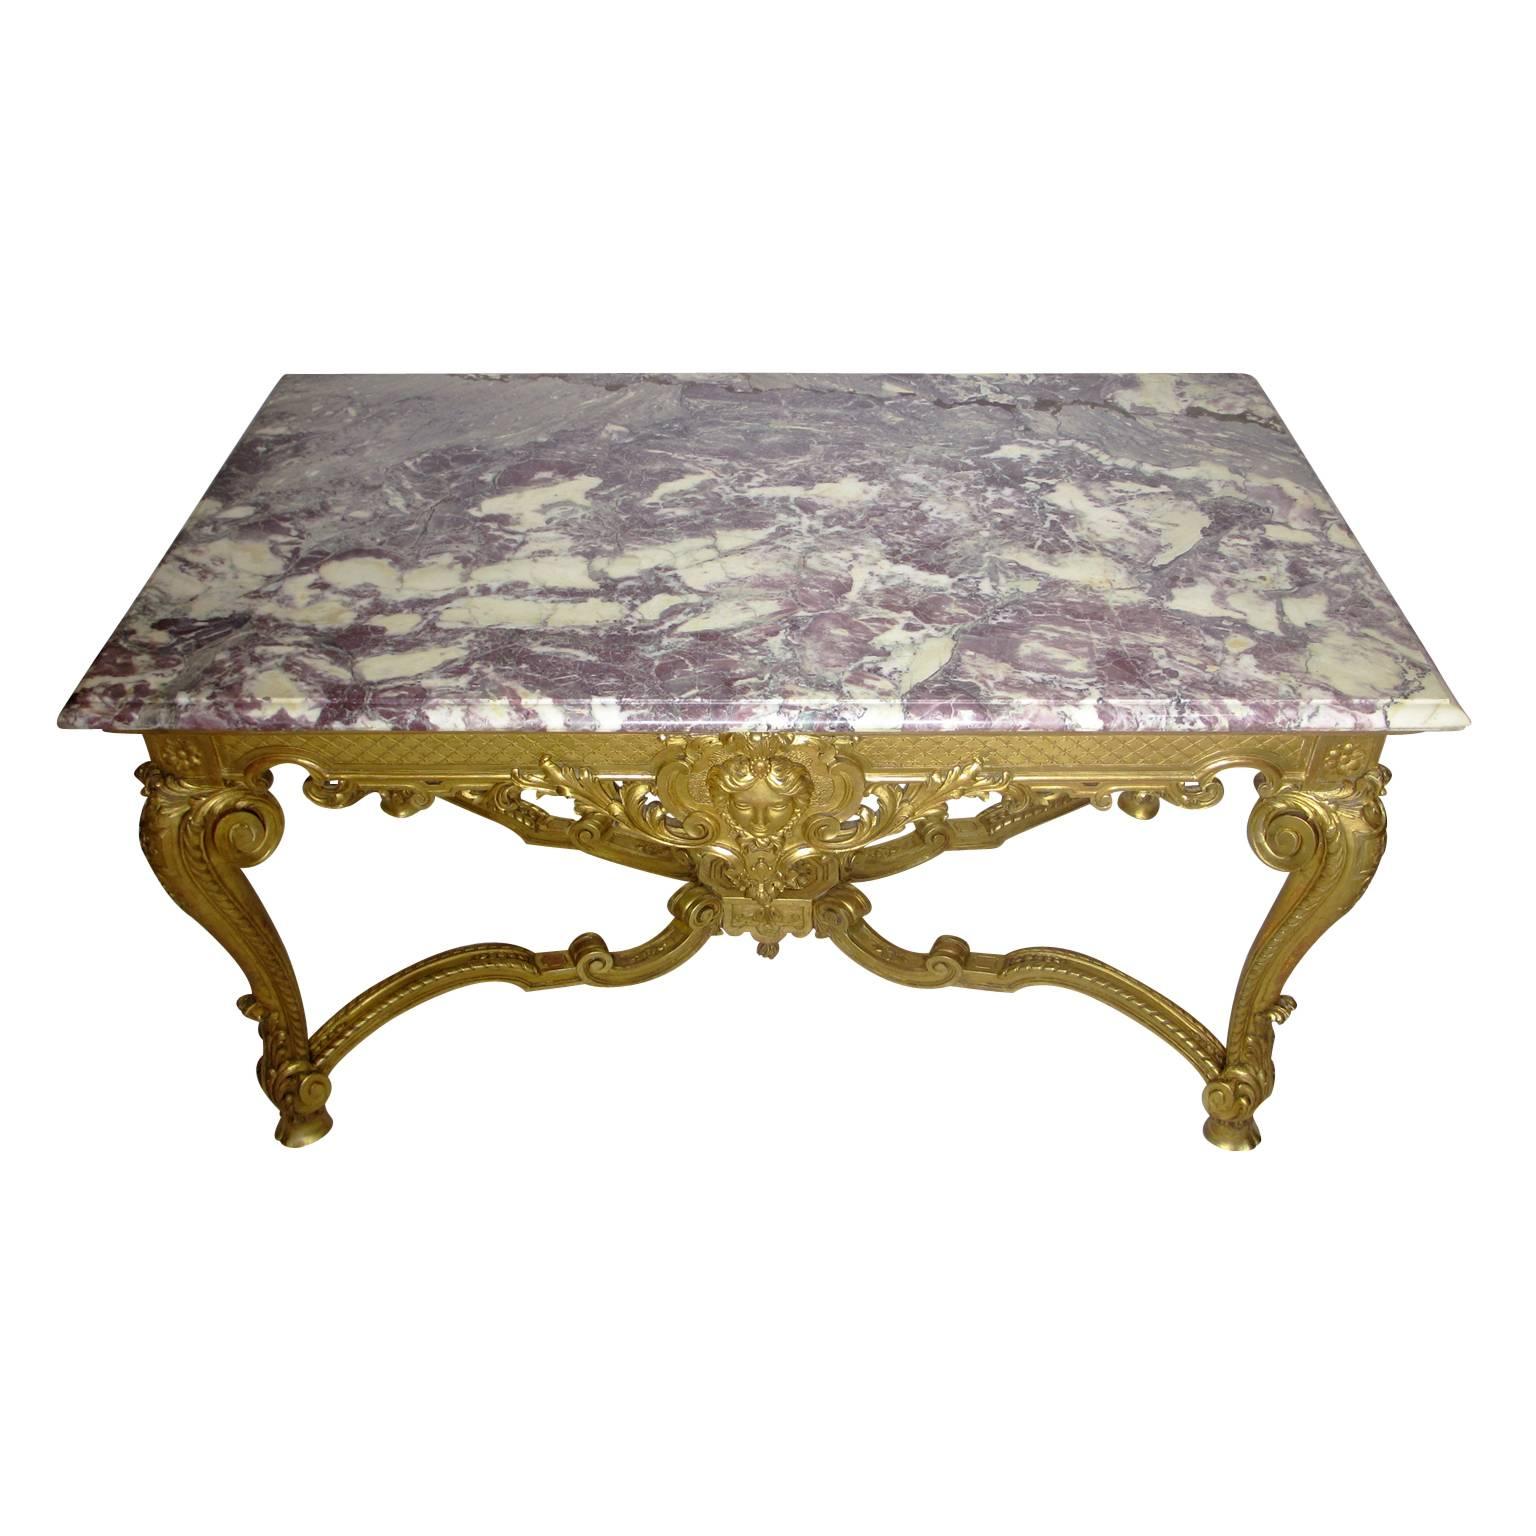 Fine French 19th Century Louis XV Style Giltwood Carved Figural Center Table For Sale 2